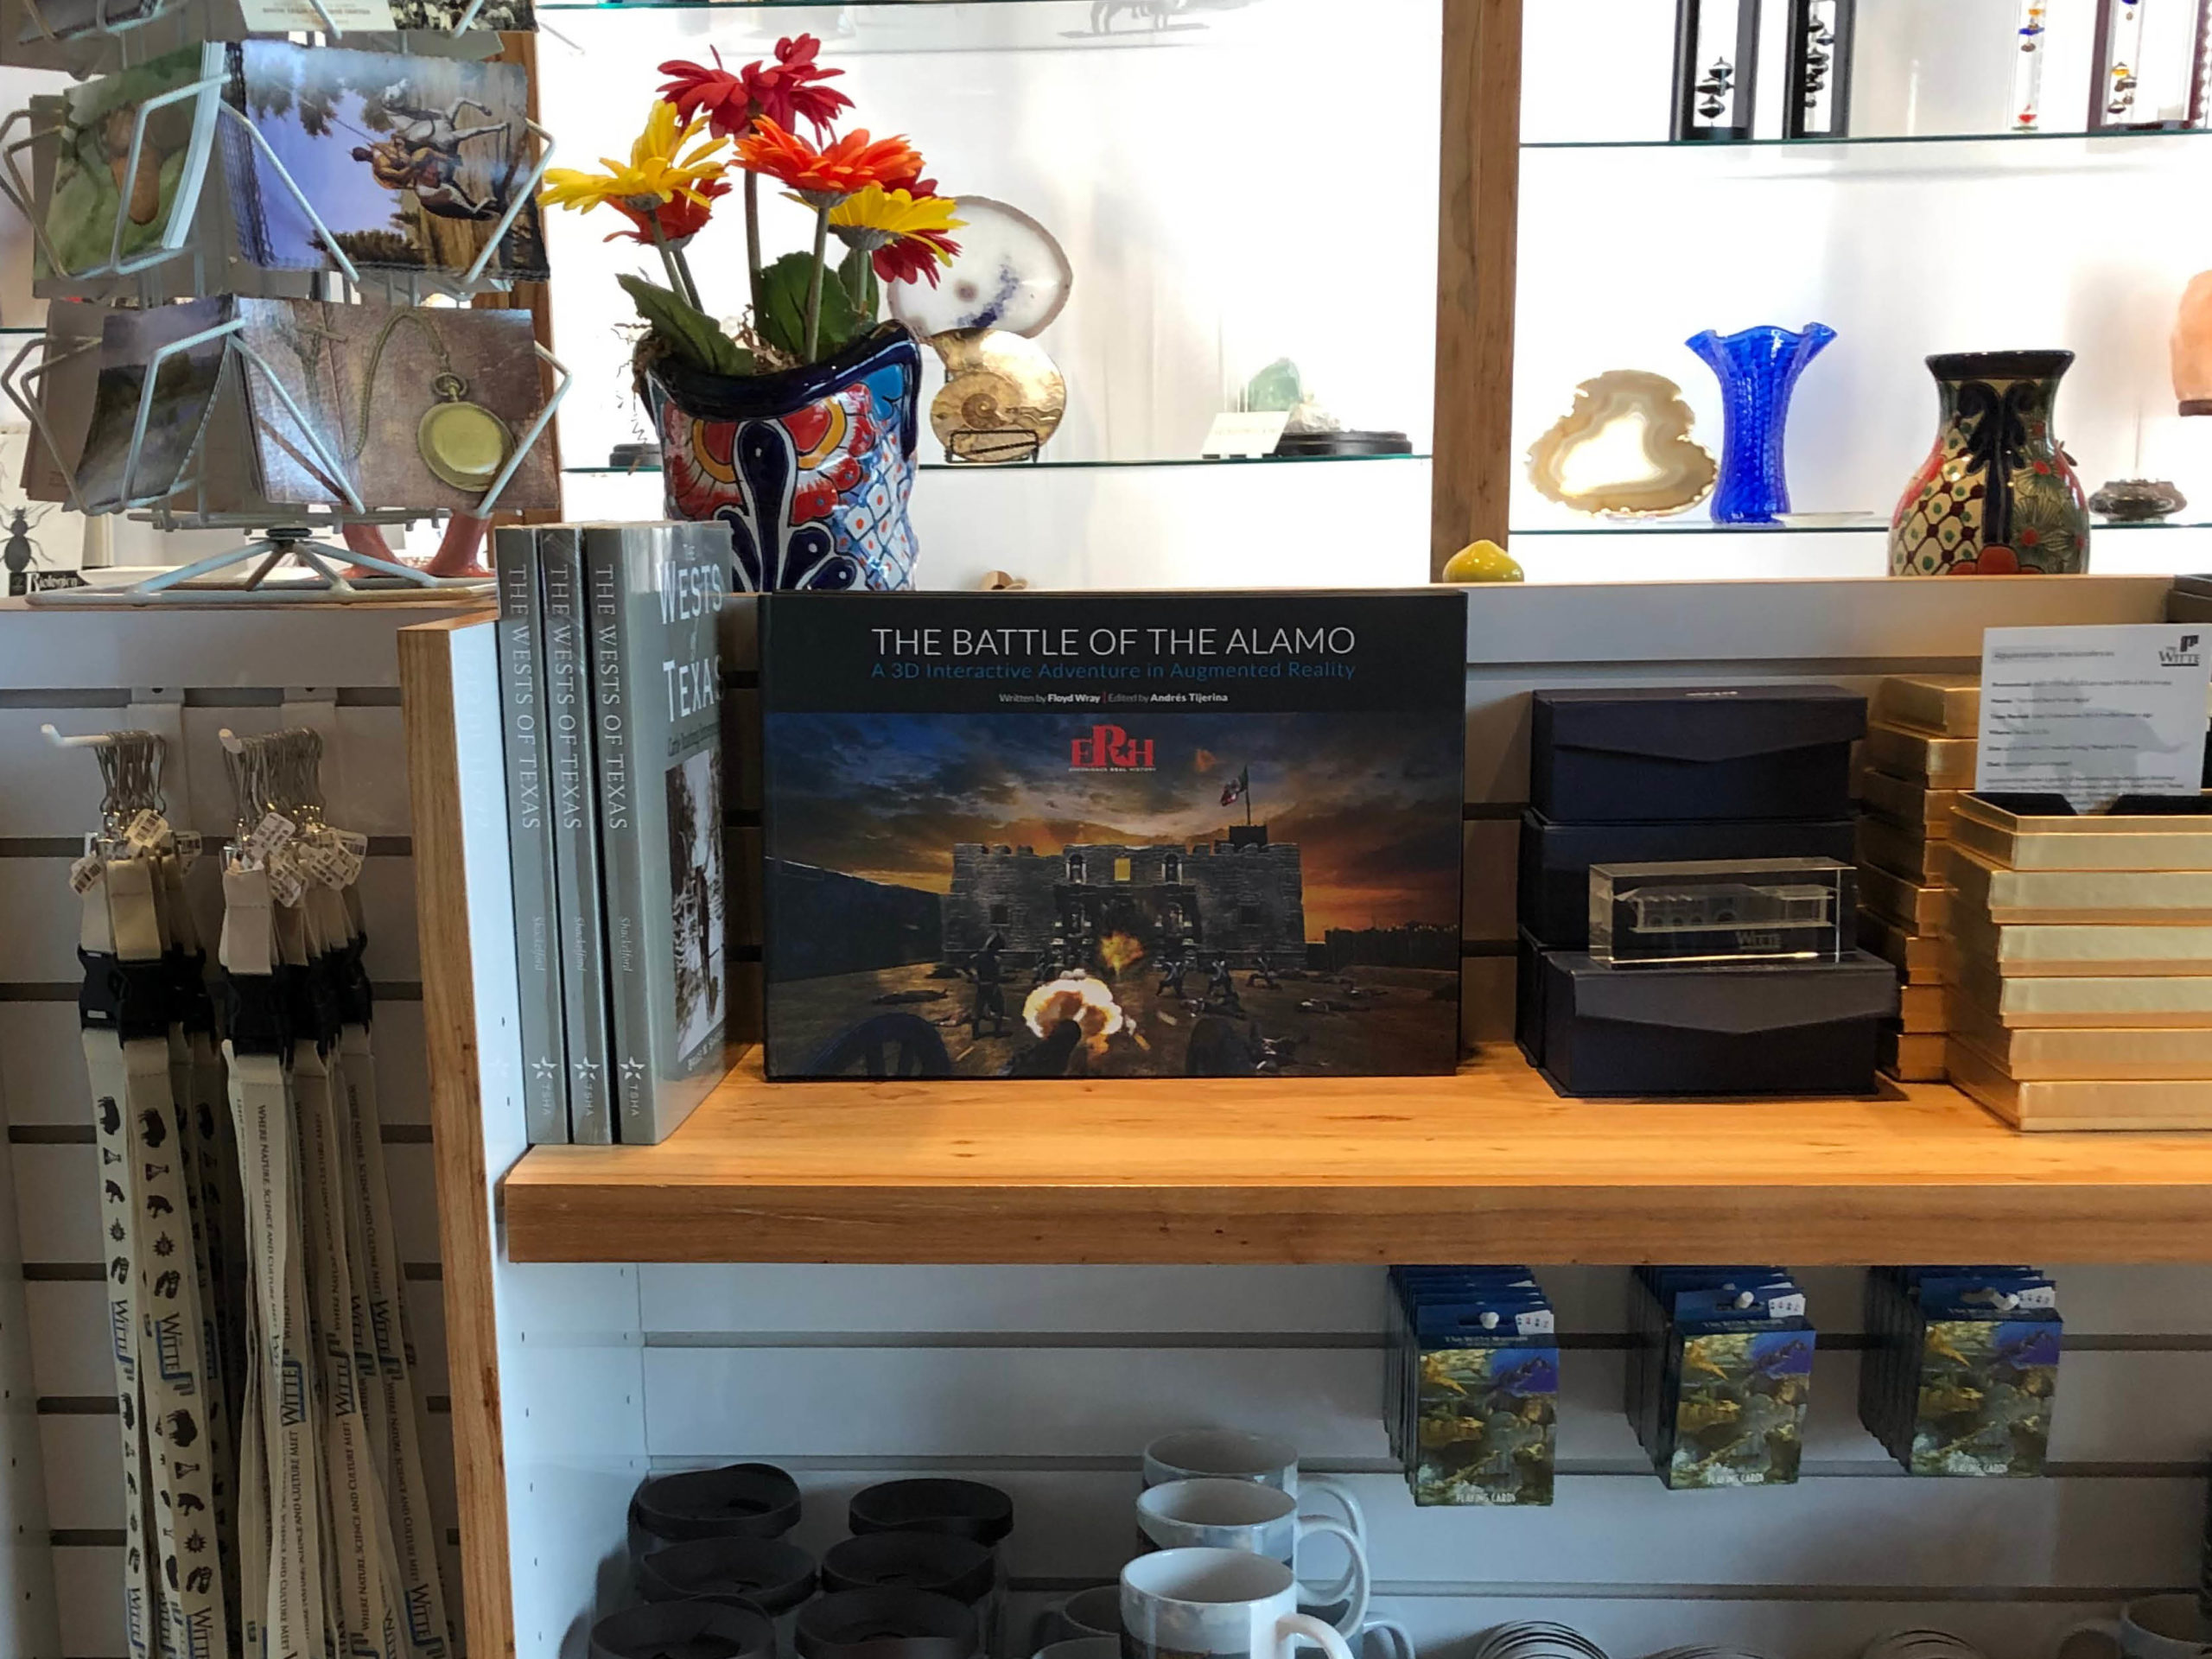 Museum Store Display Featuring Alamo Book